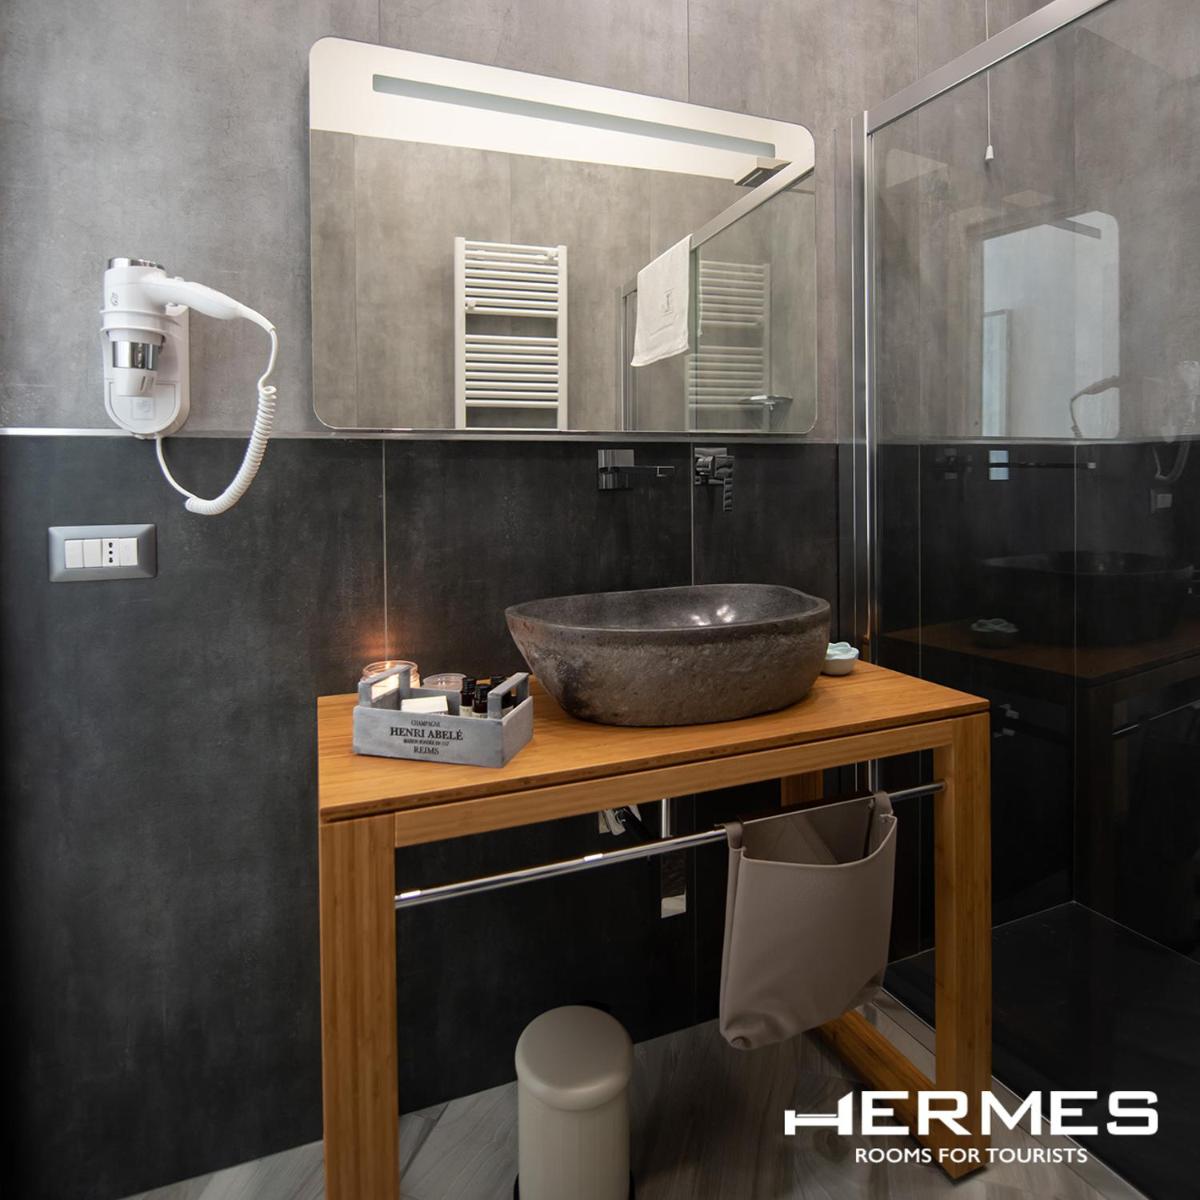 Photo - Hermes rooms for tourists